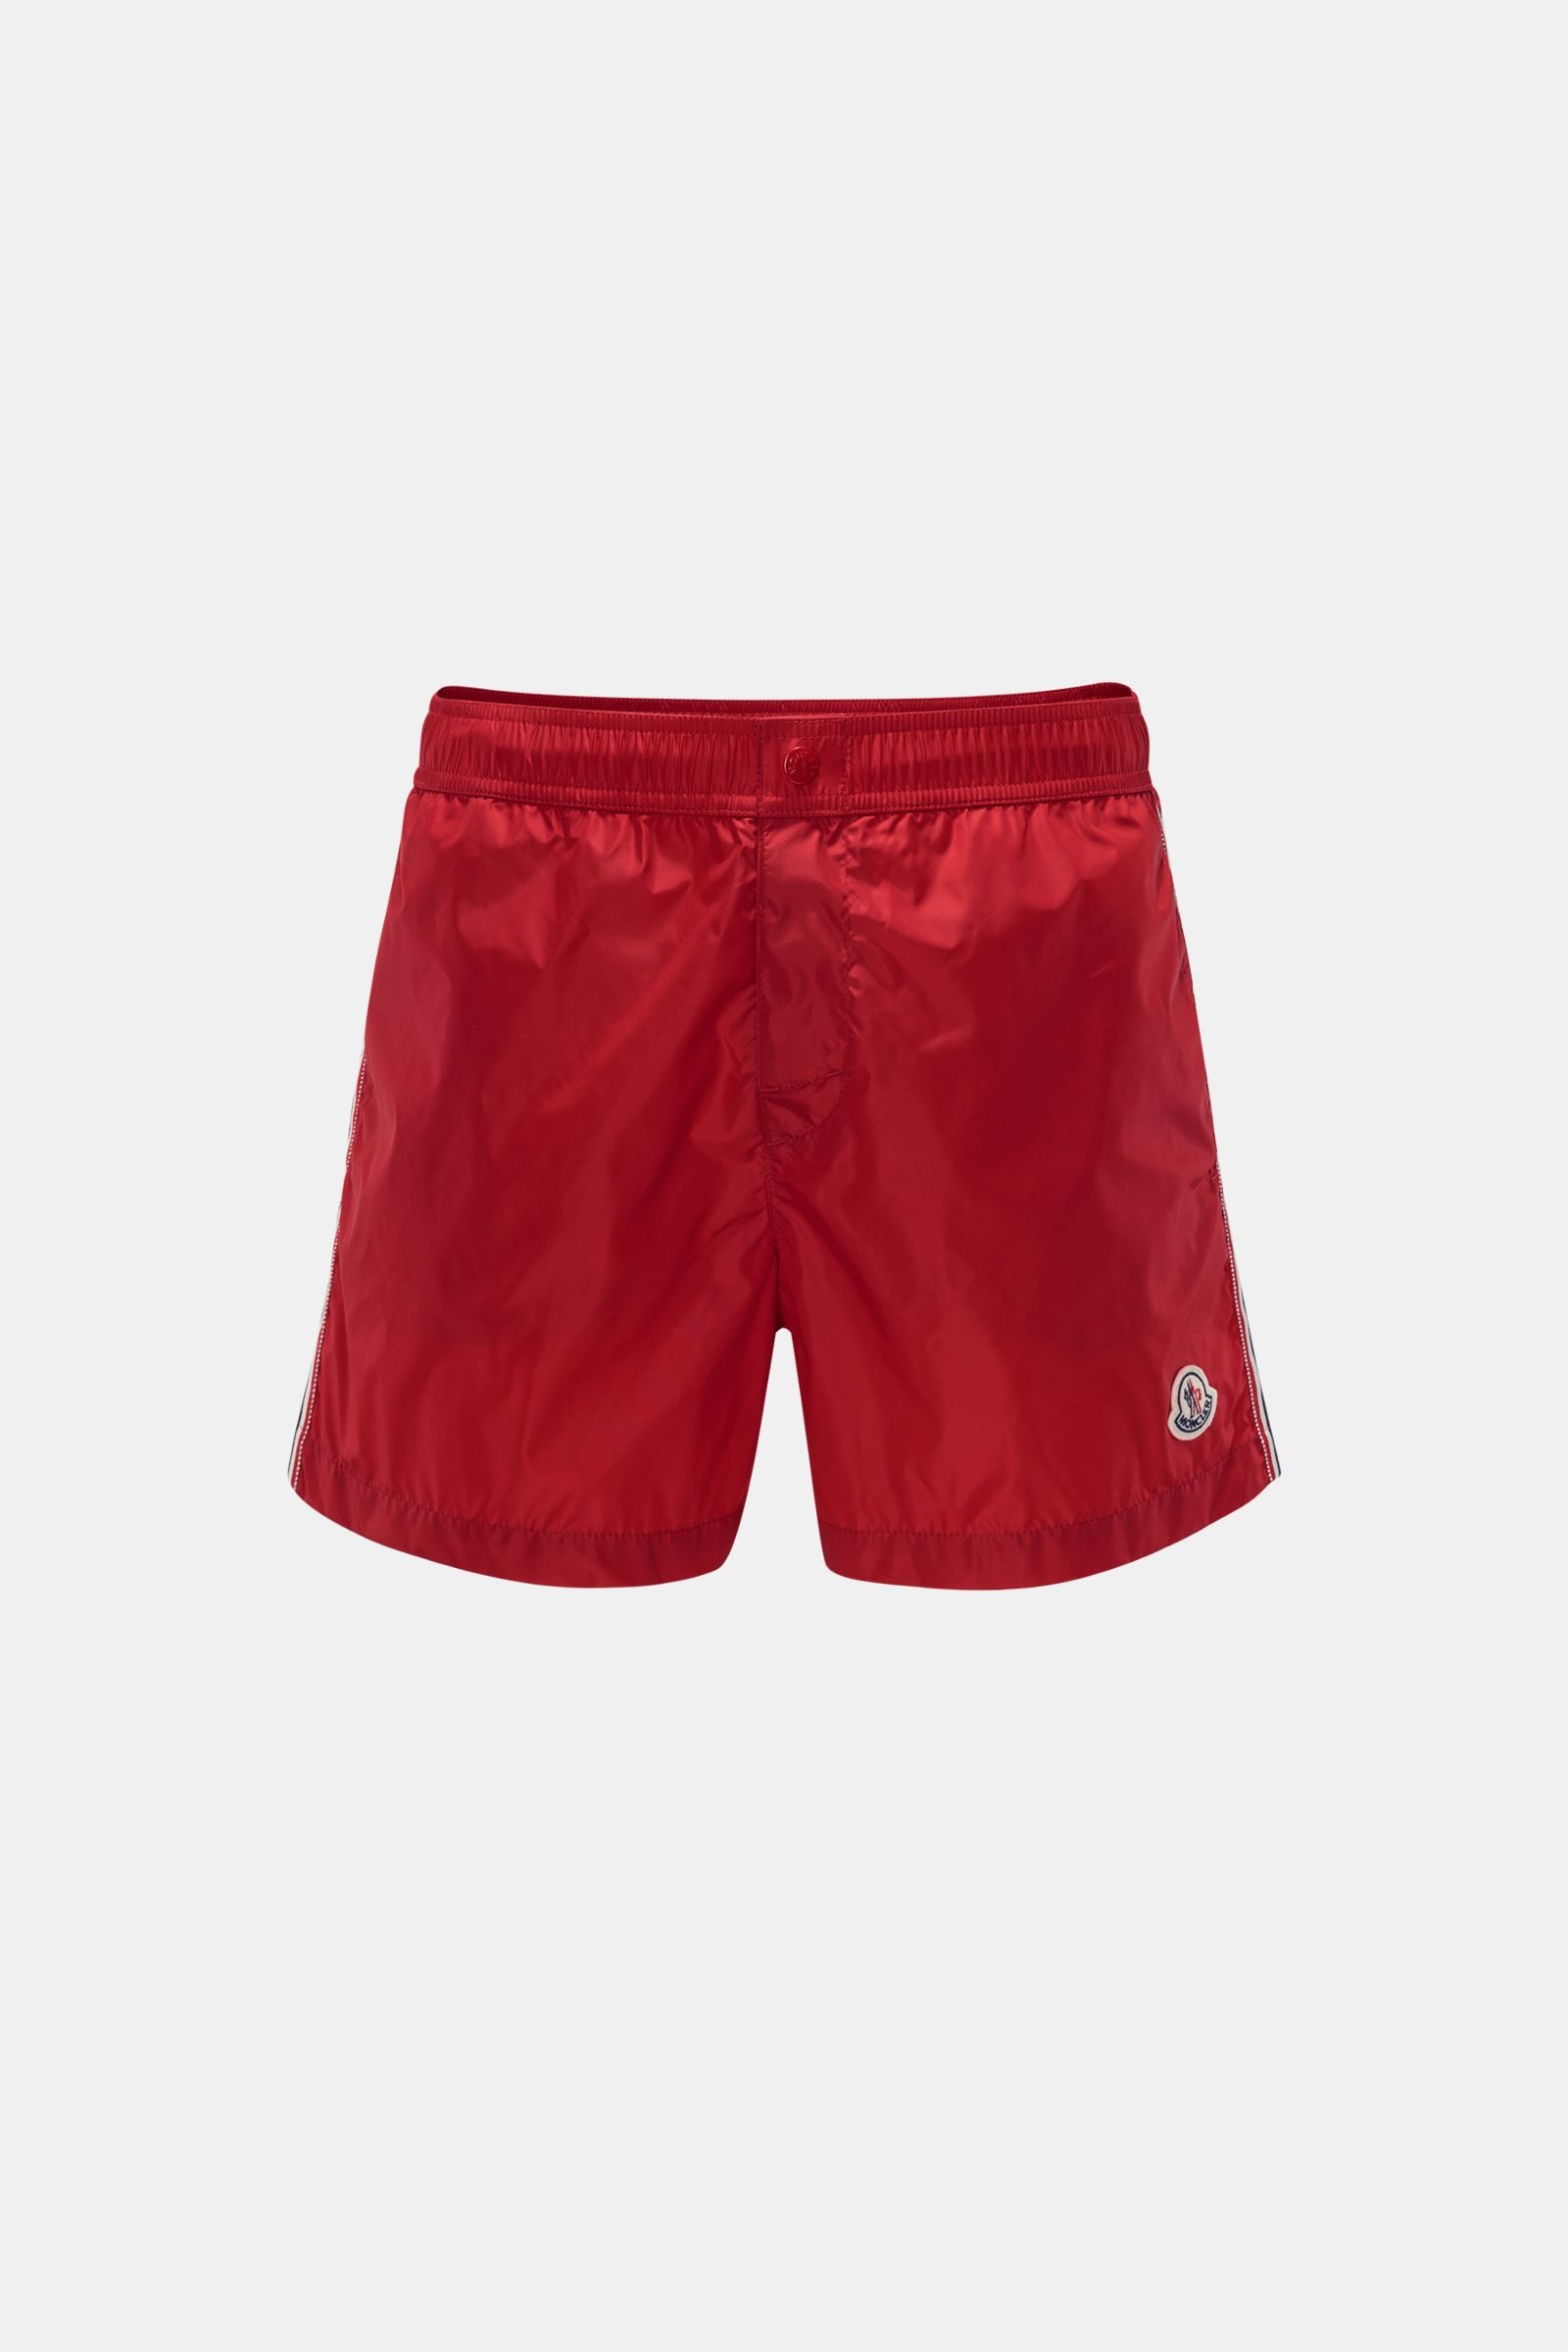 Red Moncler Shorts Clearance, SAVE 56%.